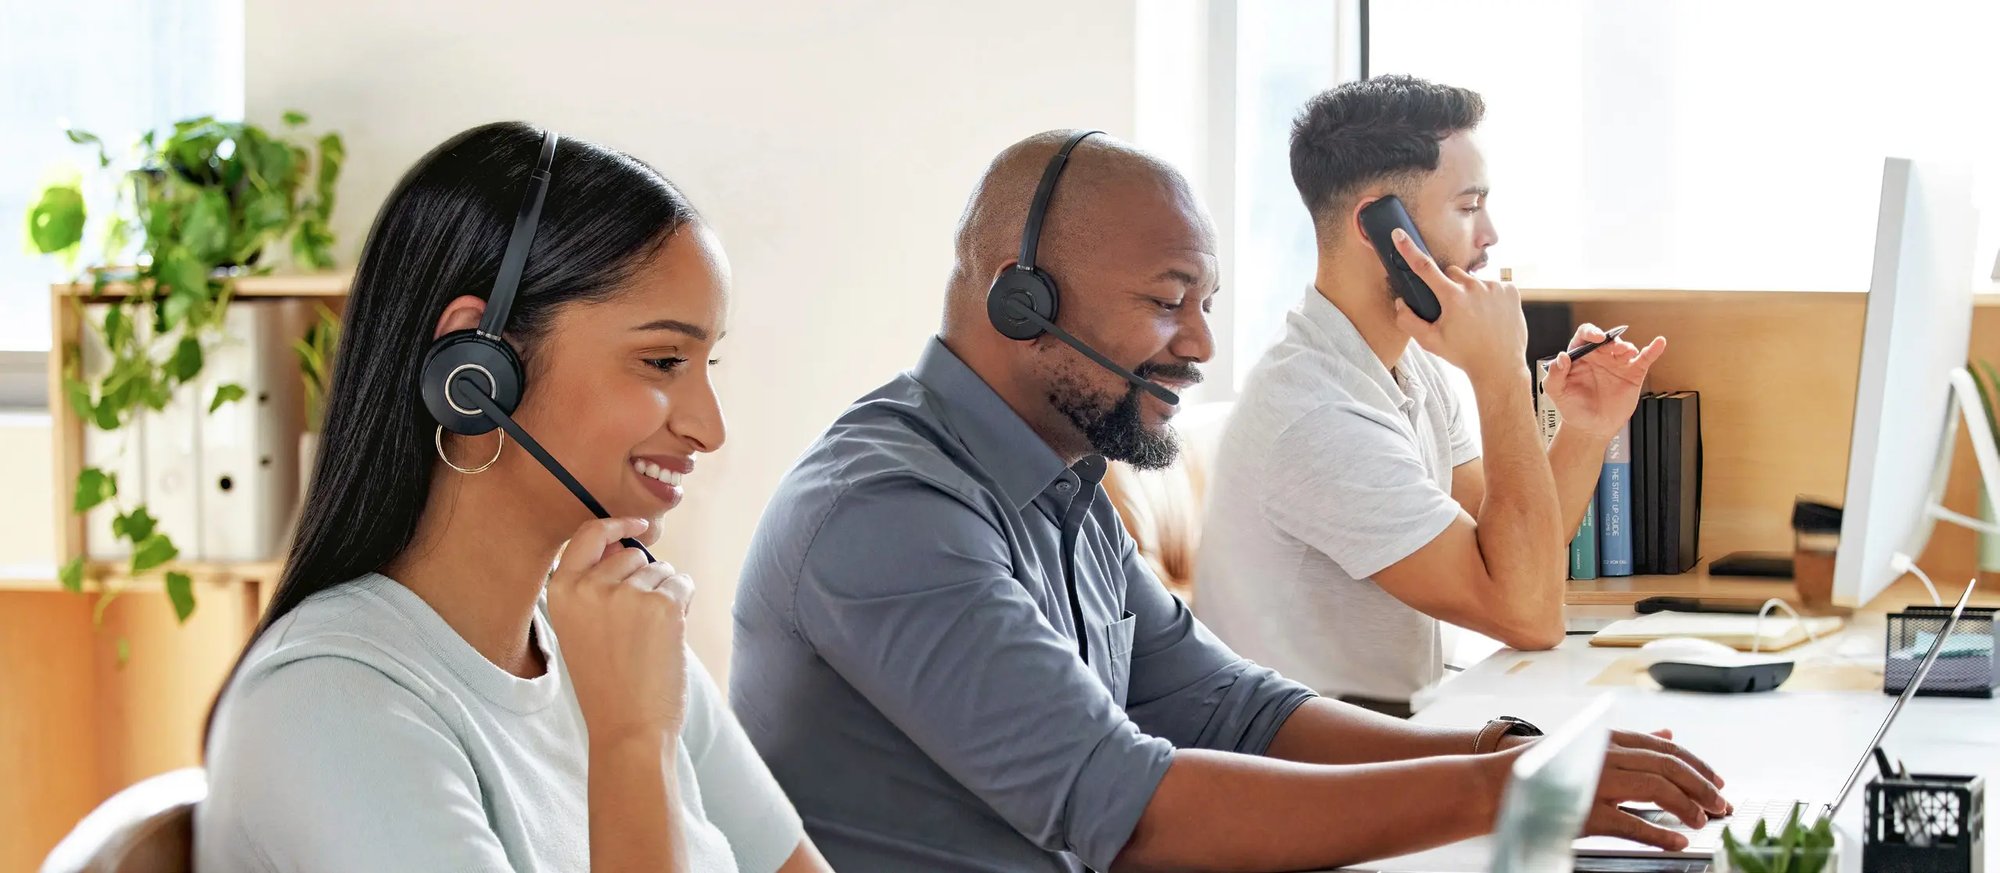 Customer Support Personnel working on computers with headsets on.  